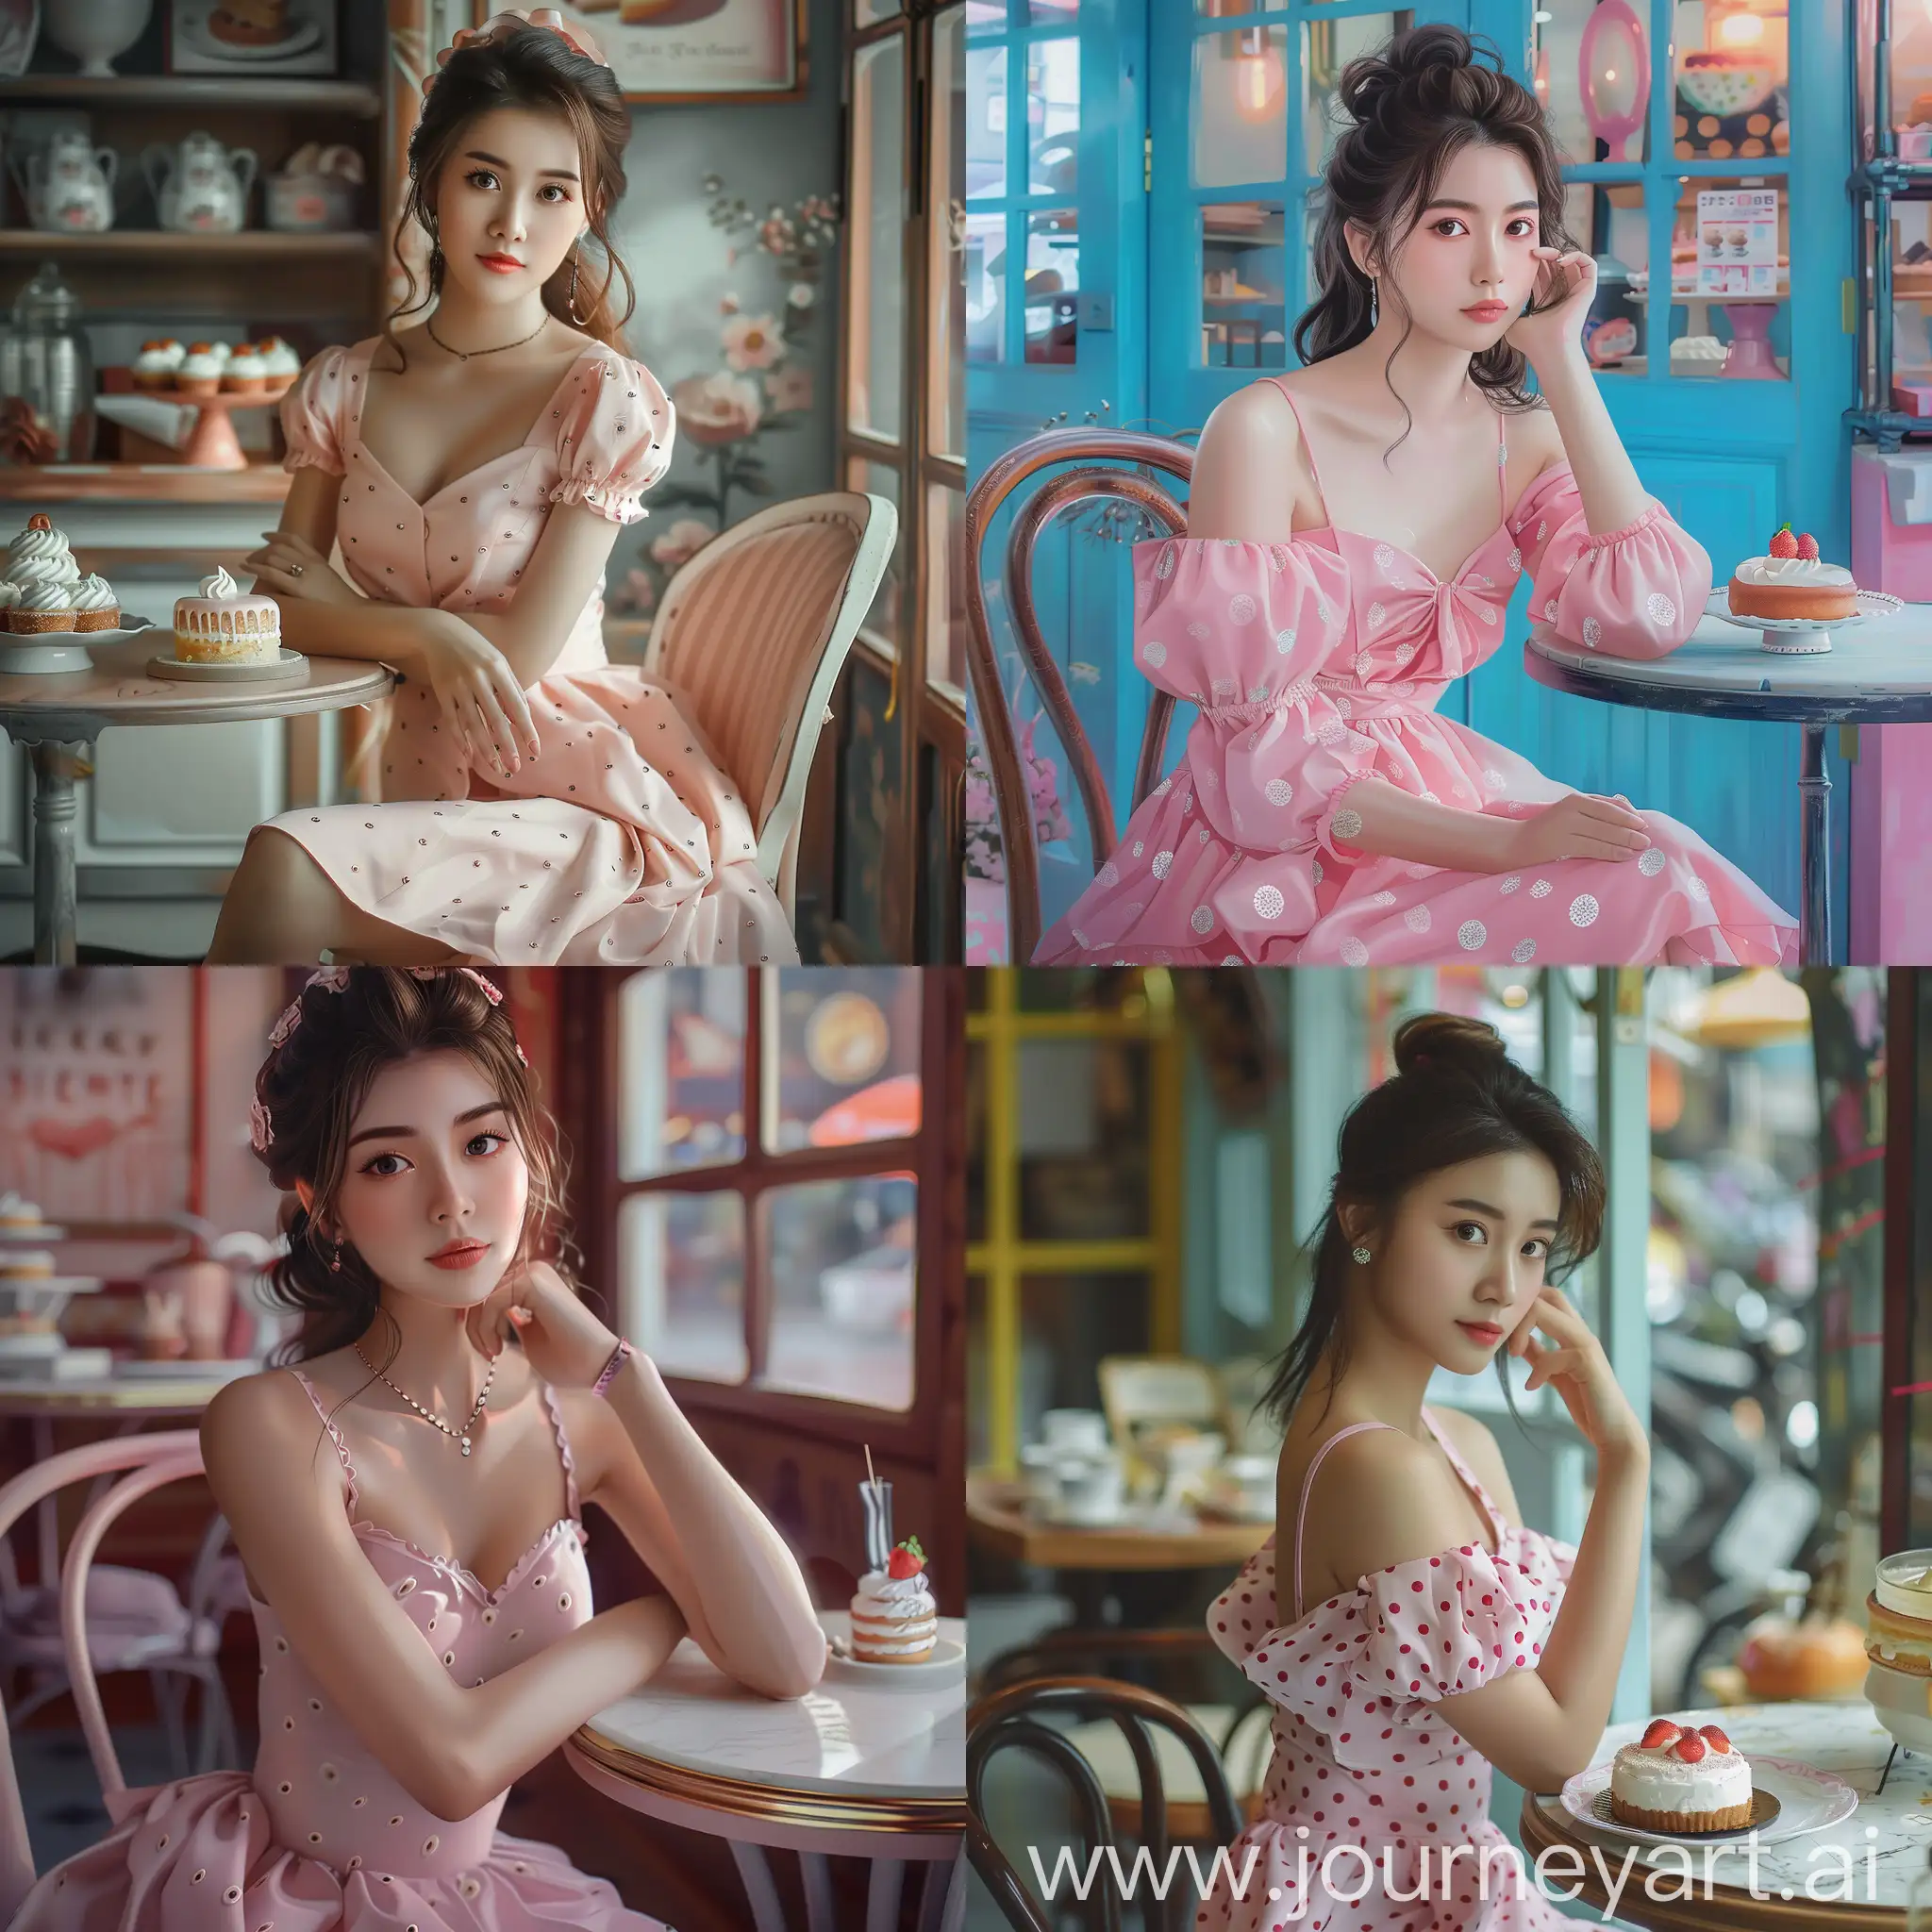 A young Thai woman with white skin, beautiful like a princess, 20 years old, sweet eyes, beautiful brown eyes, dark brown hair tied back, wearing a modern short dress in pink with big white polka dots, sitting on a chair in a cozy bakery with 1 small cake on a small table. Realistic image, bright colors, 64K resolution.